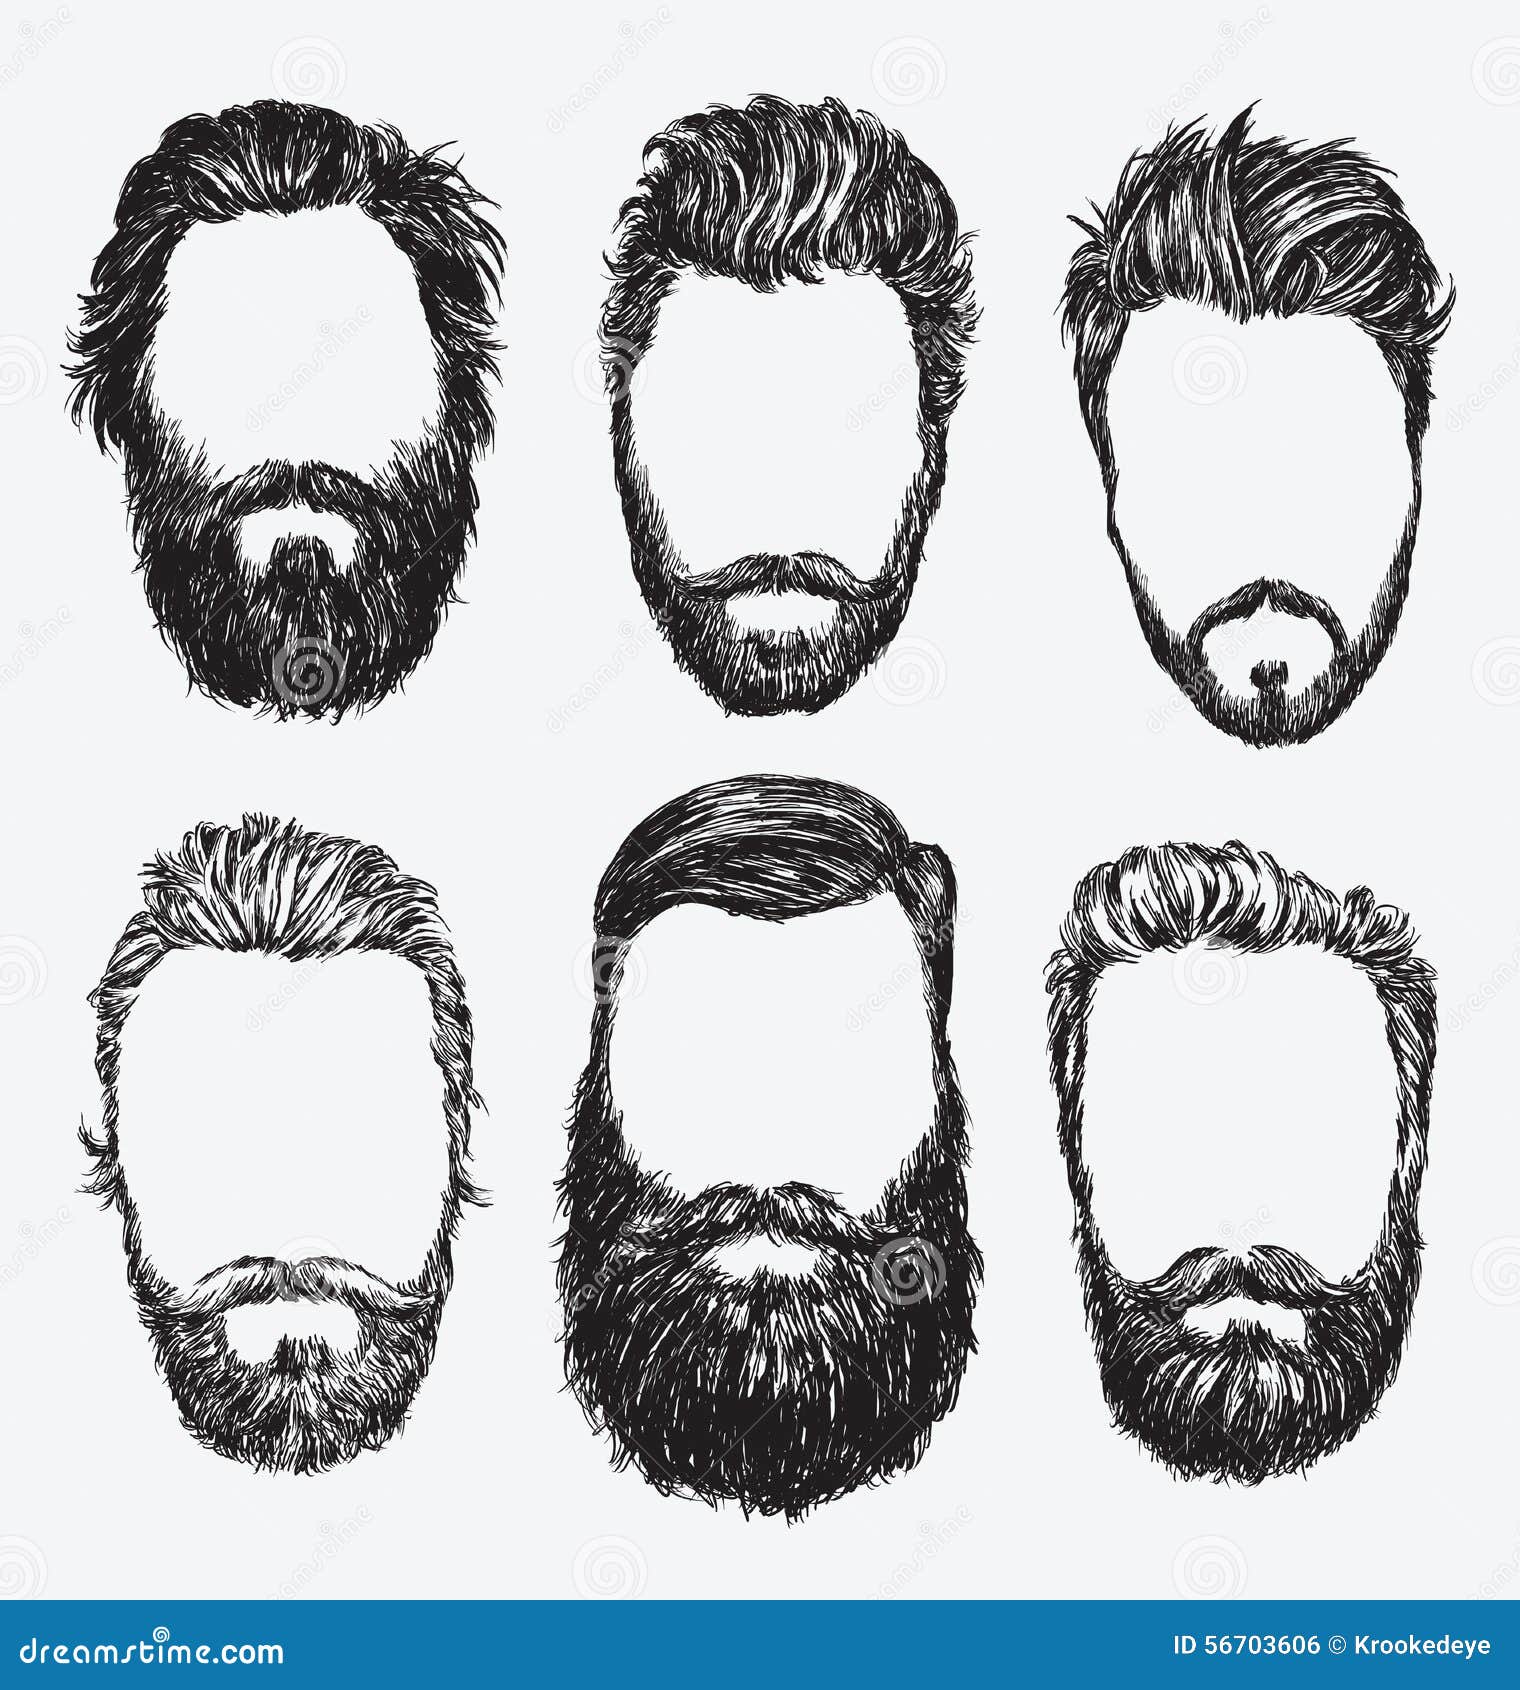 Hipster Hair And Beards, Fashion Vector Illustration Set 